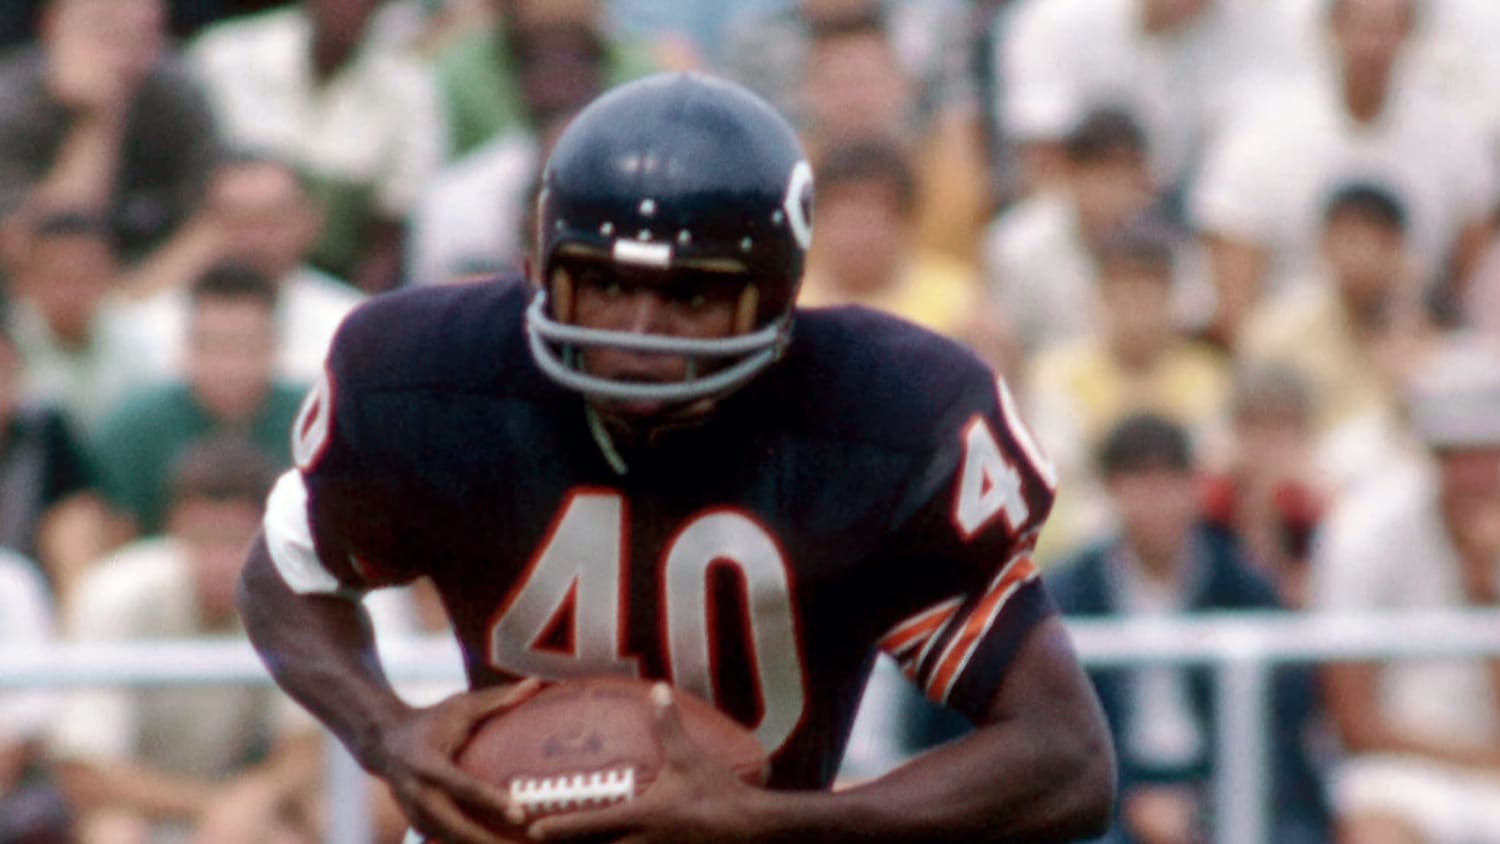 Chicago Bears legend and Hall of Fame running back Gale Sayers dies at 77